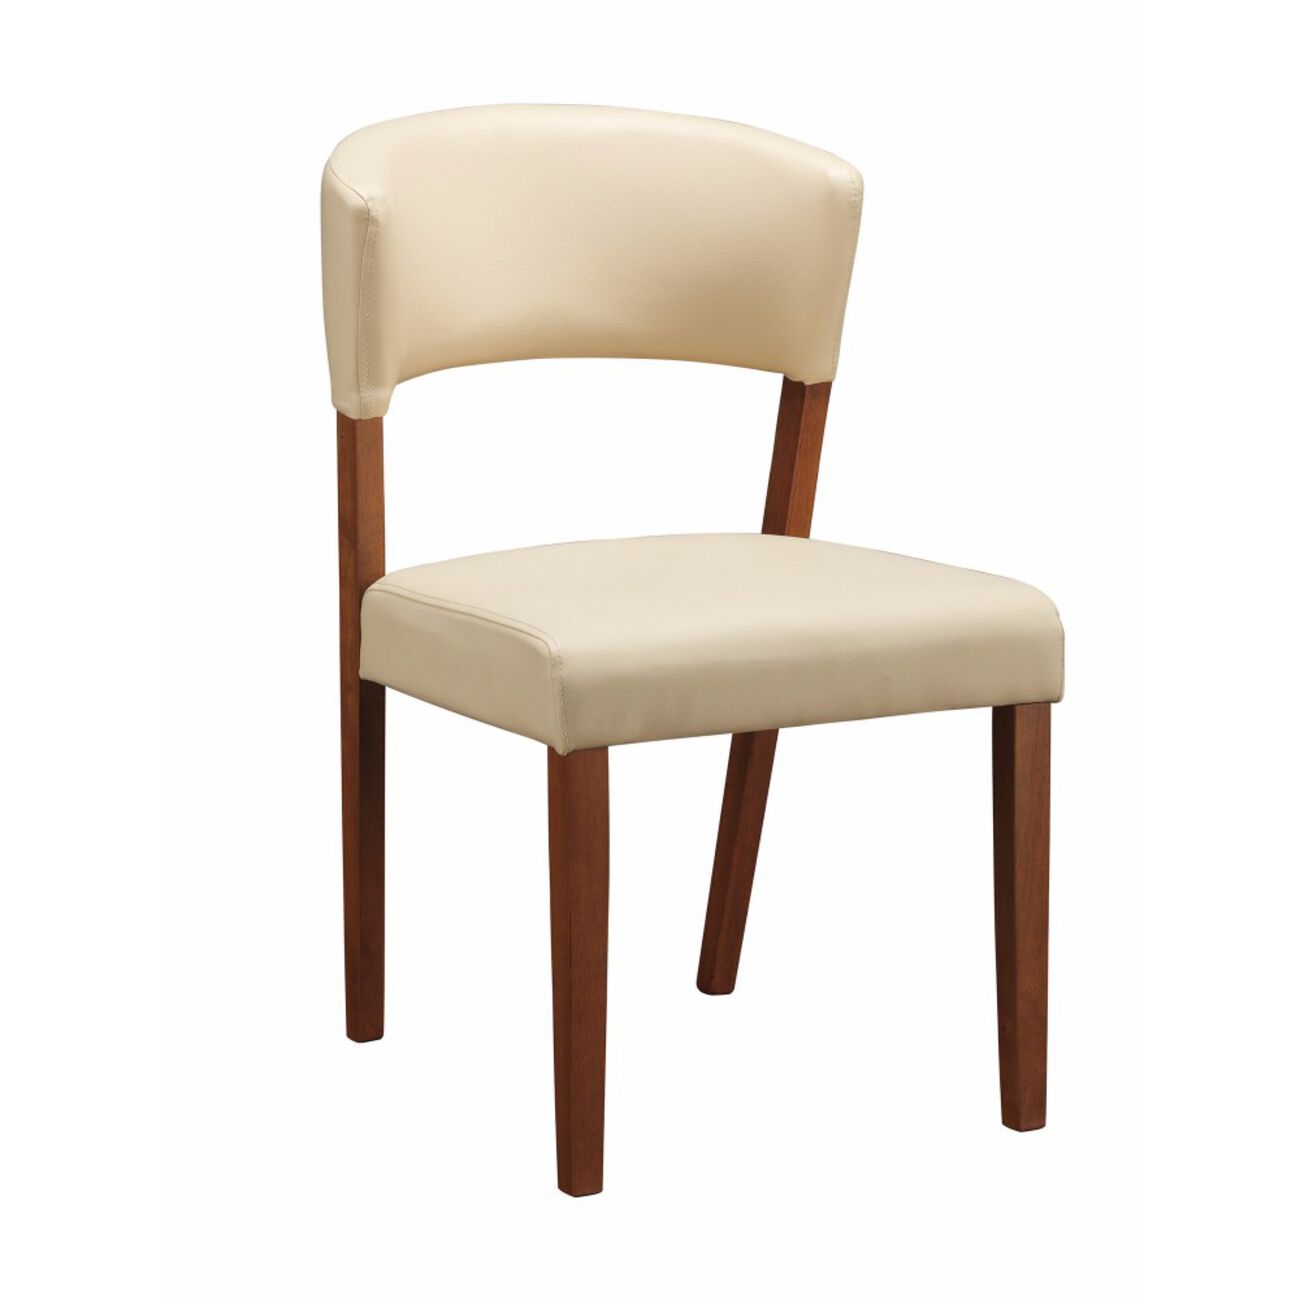 Alluring Dining Side Chair, Cream, Set of 2